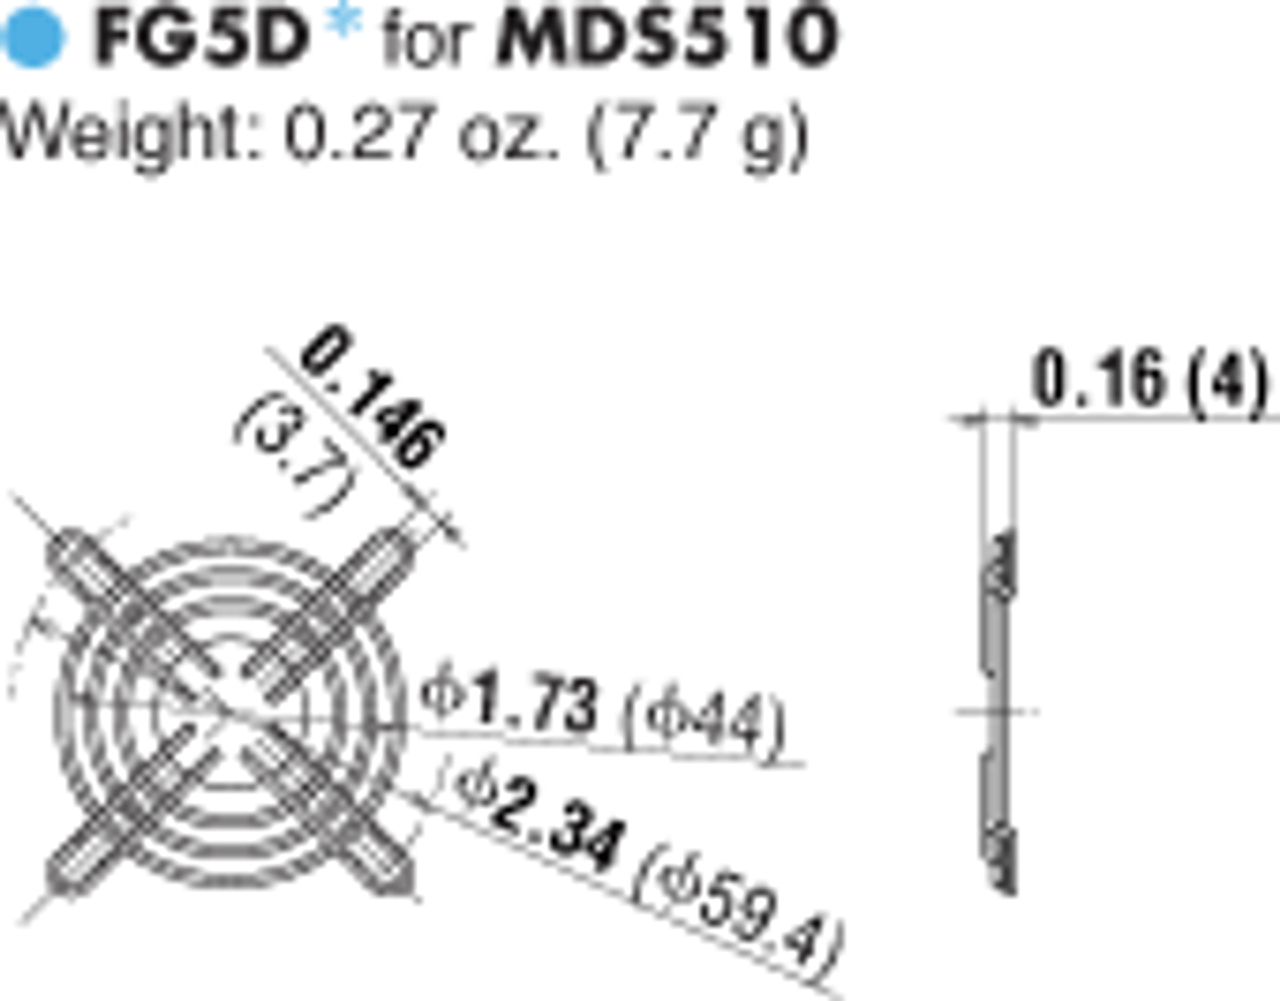 T-MDS510M-5HG - Dimensions